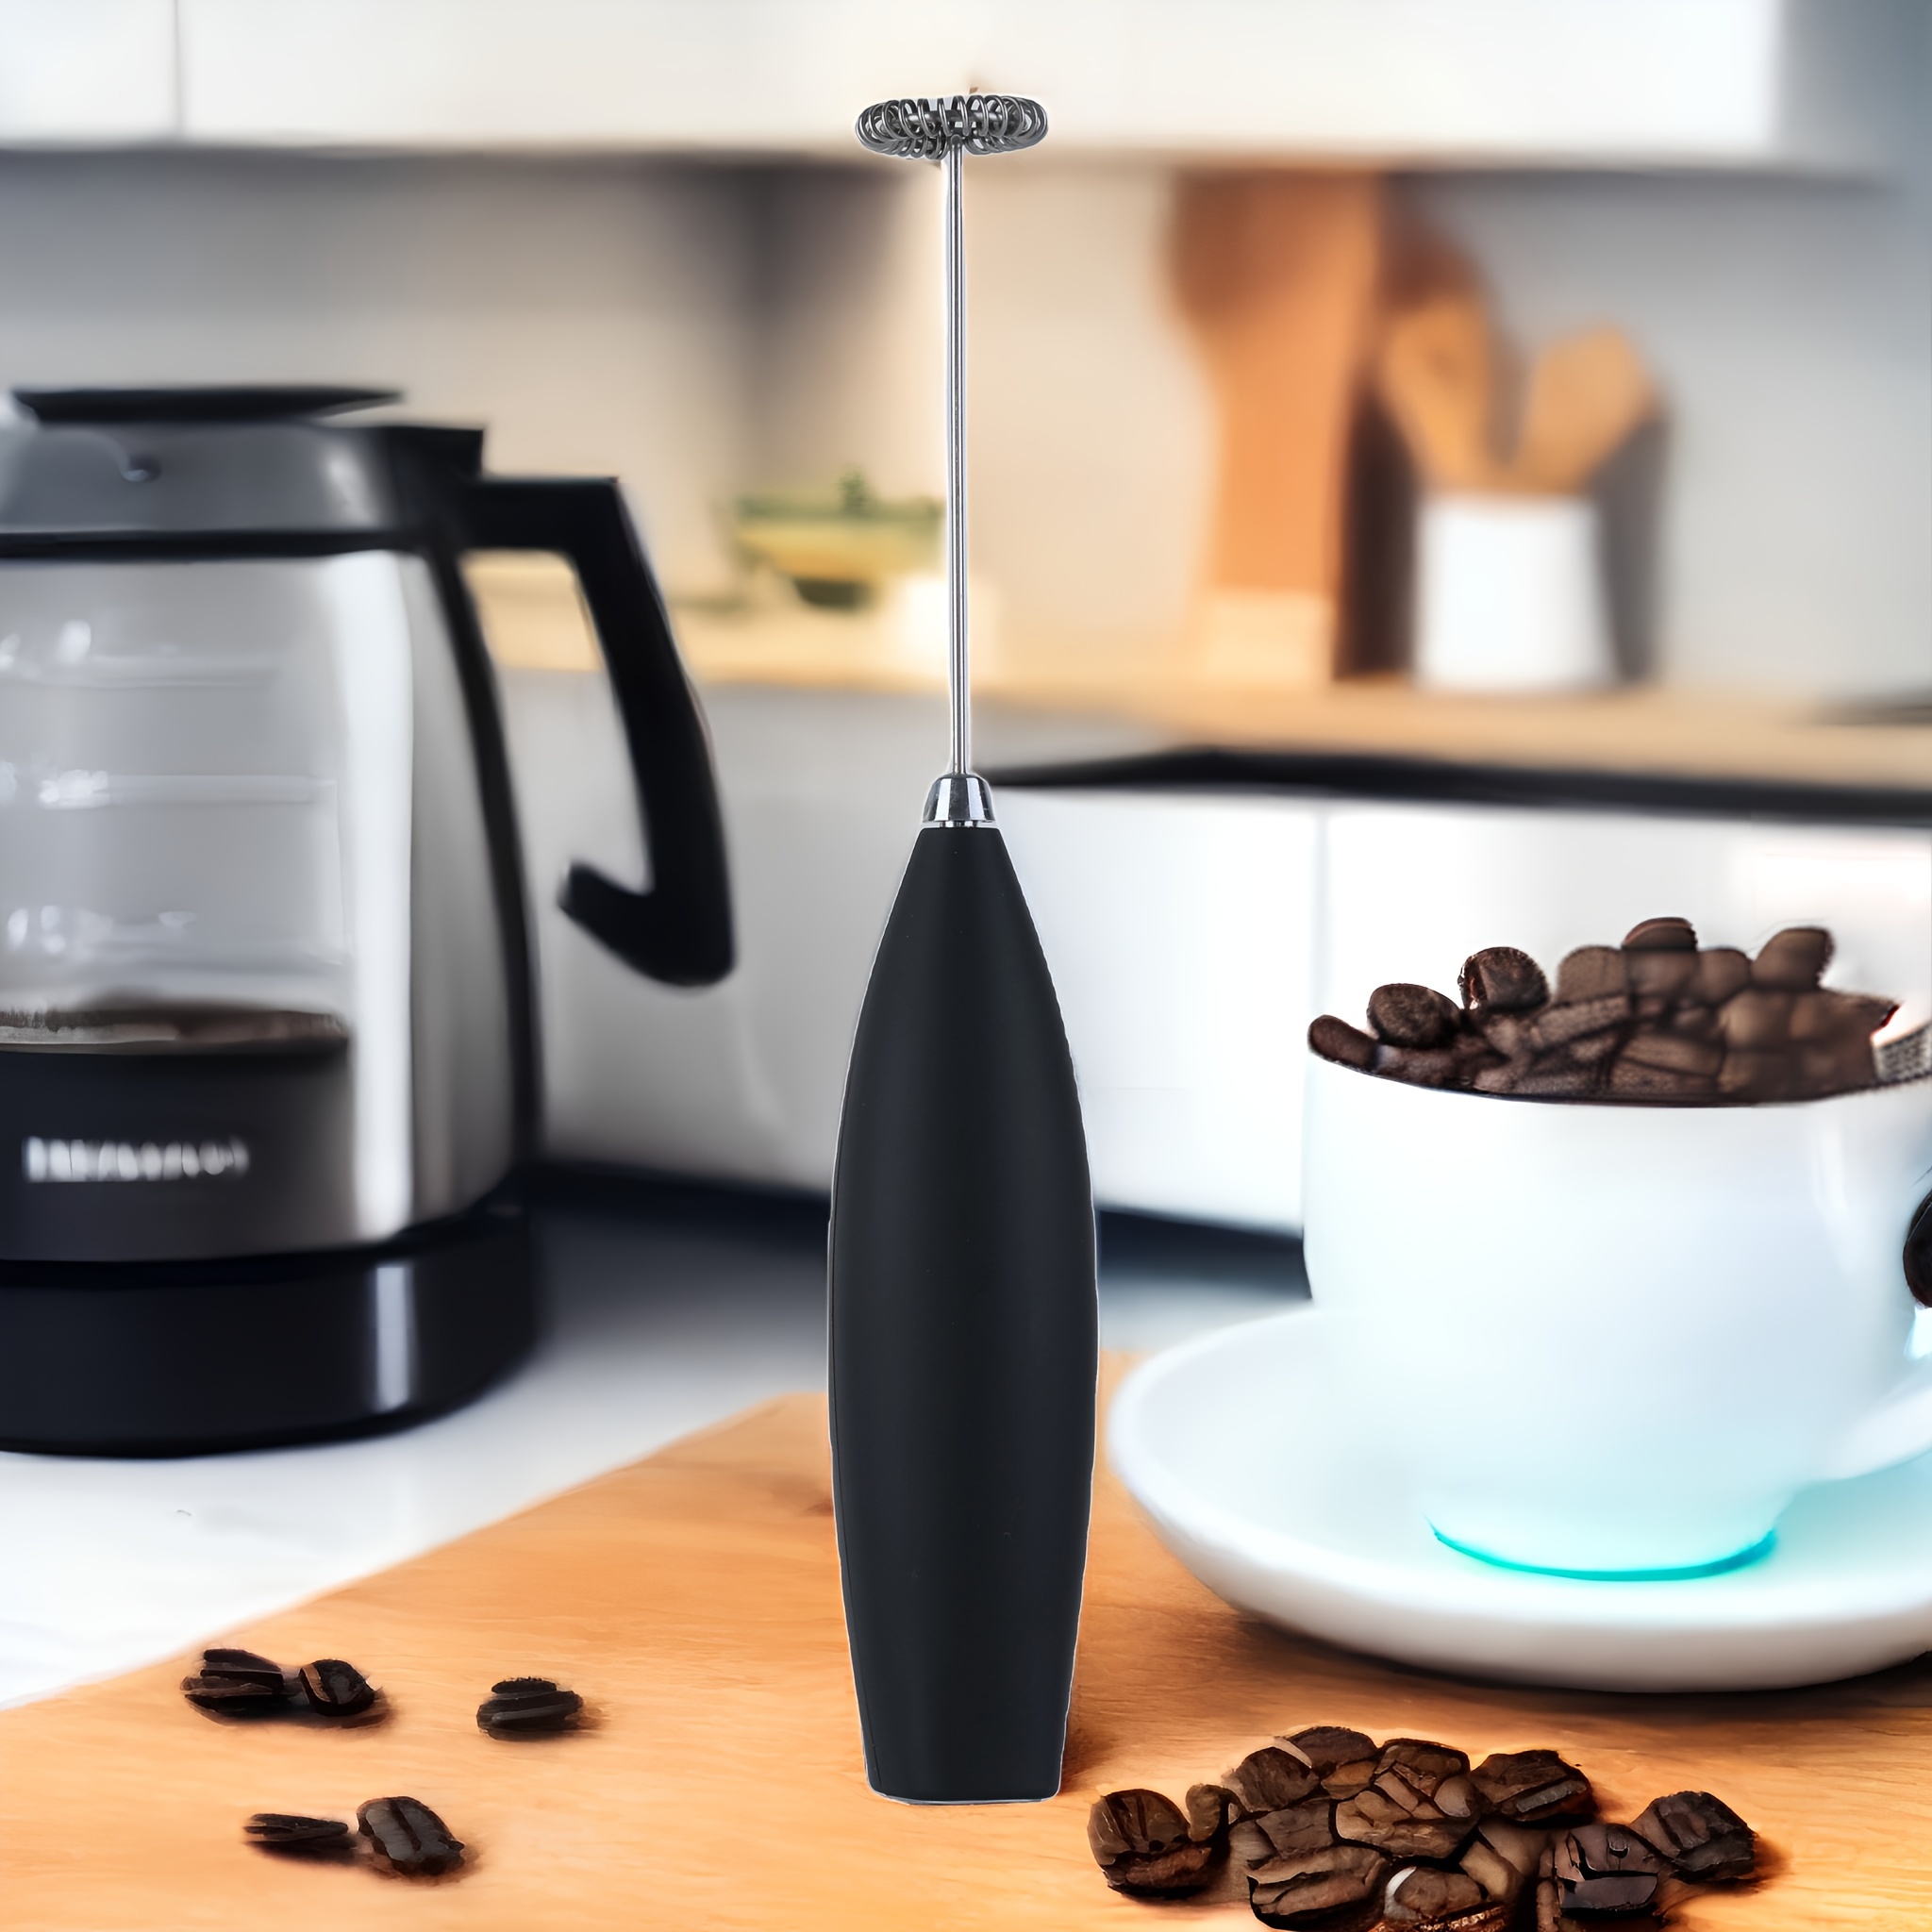 Handheld Milk Frother for Coffee - Electric Hand Blender, Mini